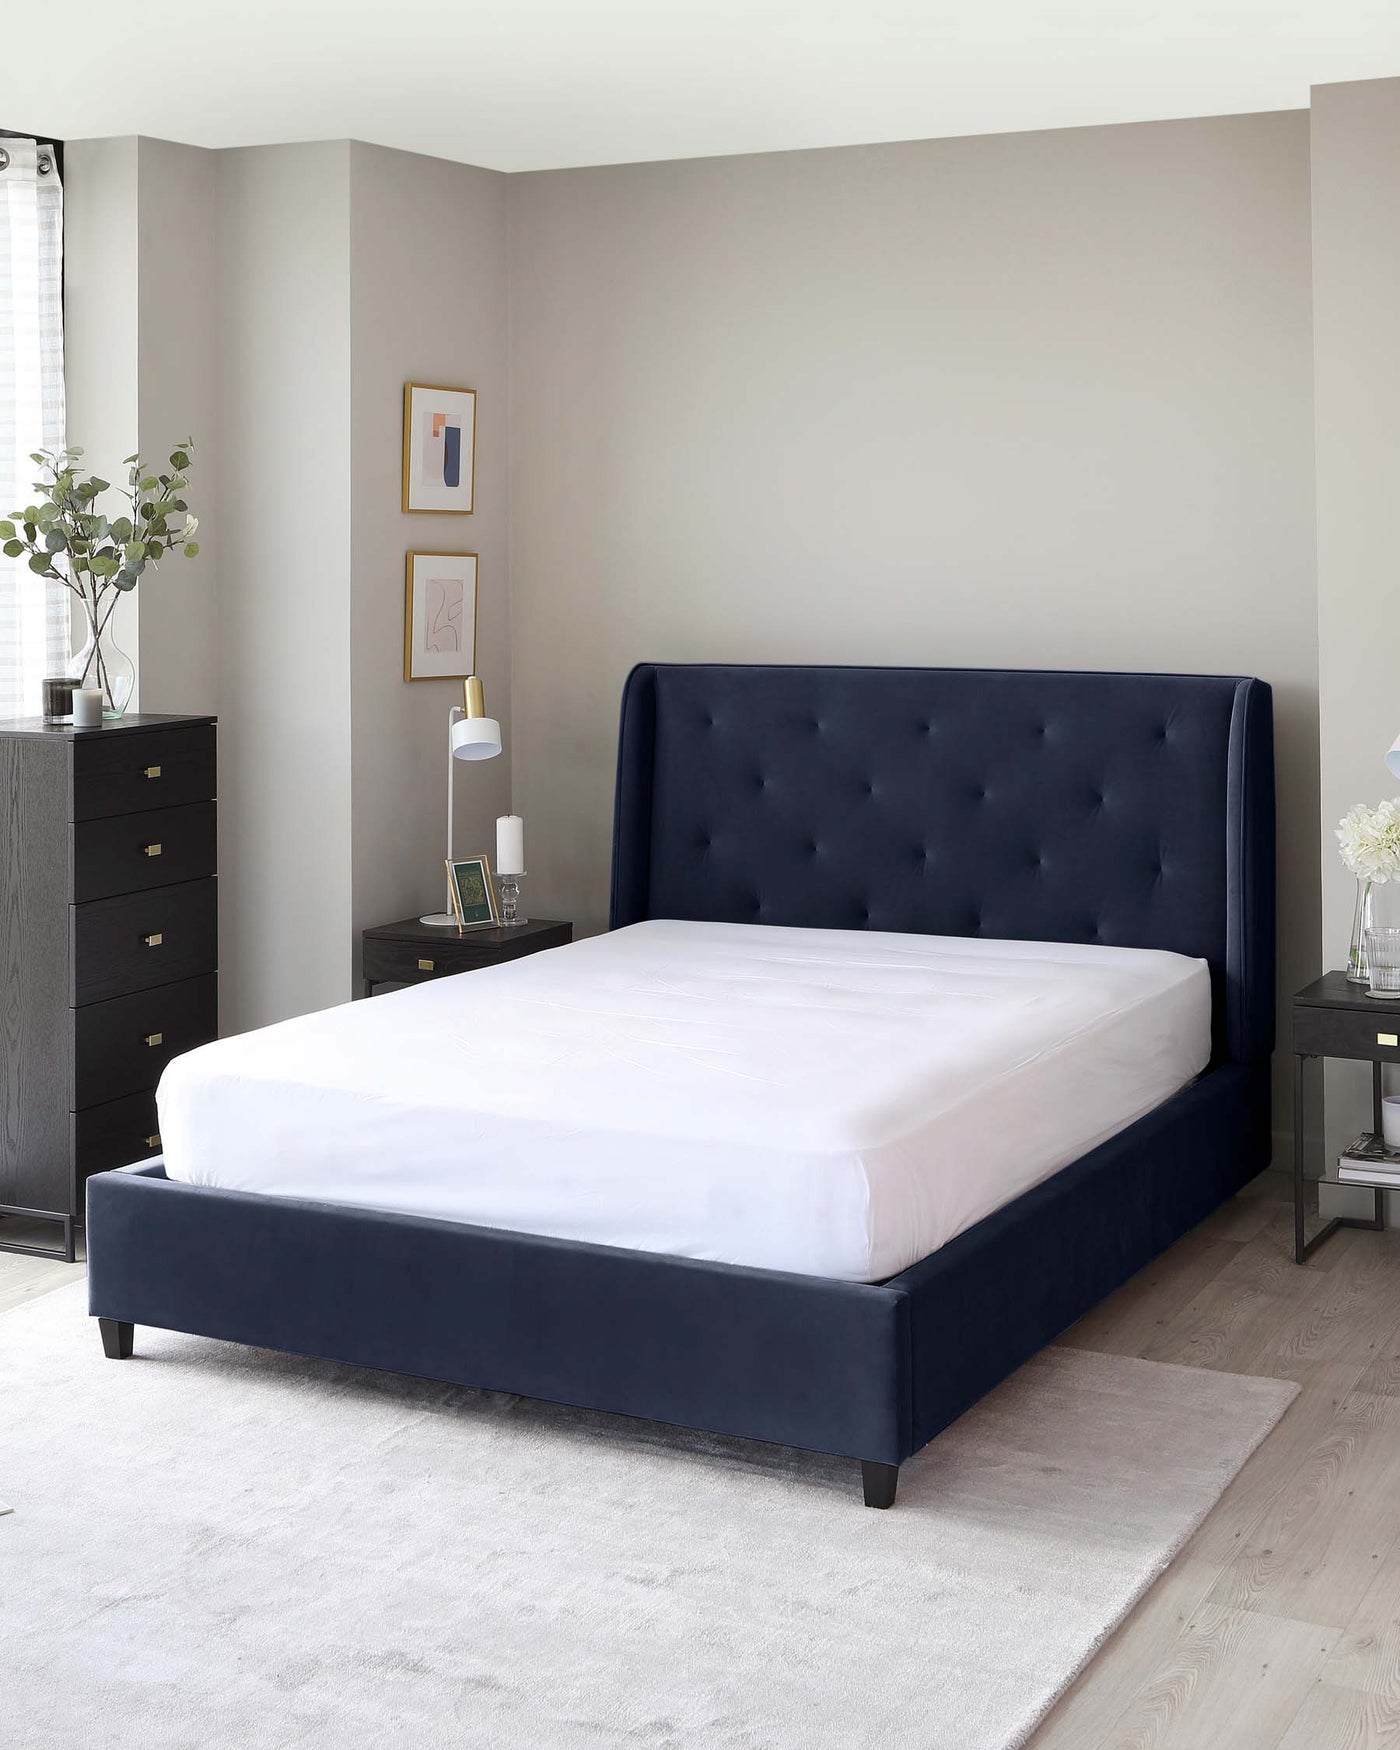 Elegant bedroom furniture set featuring a dark blue upholstered bed with a tufted headboard and matching navy blue bed frame. Beside the bed, a slender nightstand with a white tabletop lamp and a small potted plant. To the left, a taller black chest of drawers with sleek handles complements the ensemble, all displayed on a light grey area rug over wooden flooring.